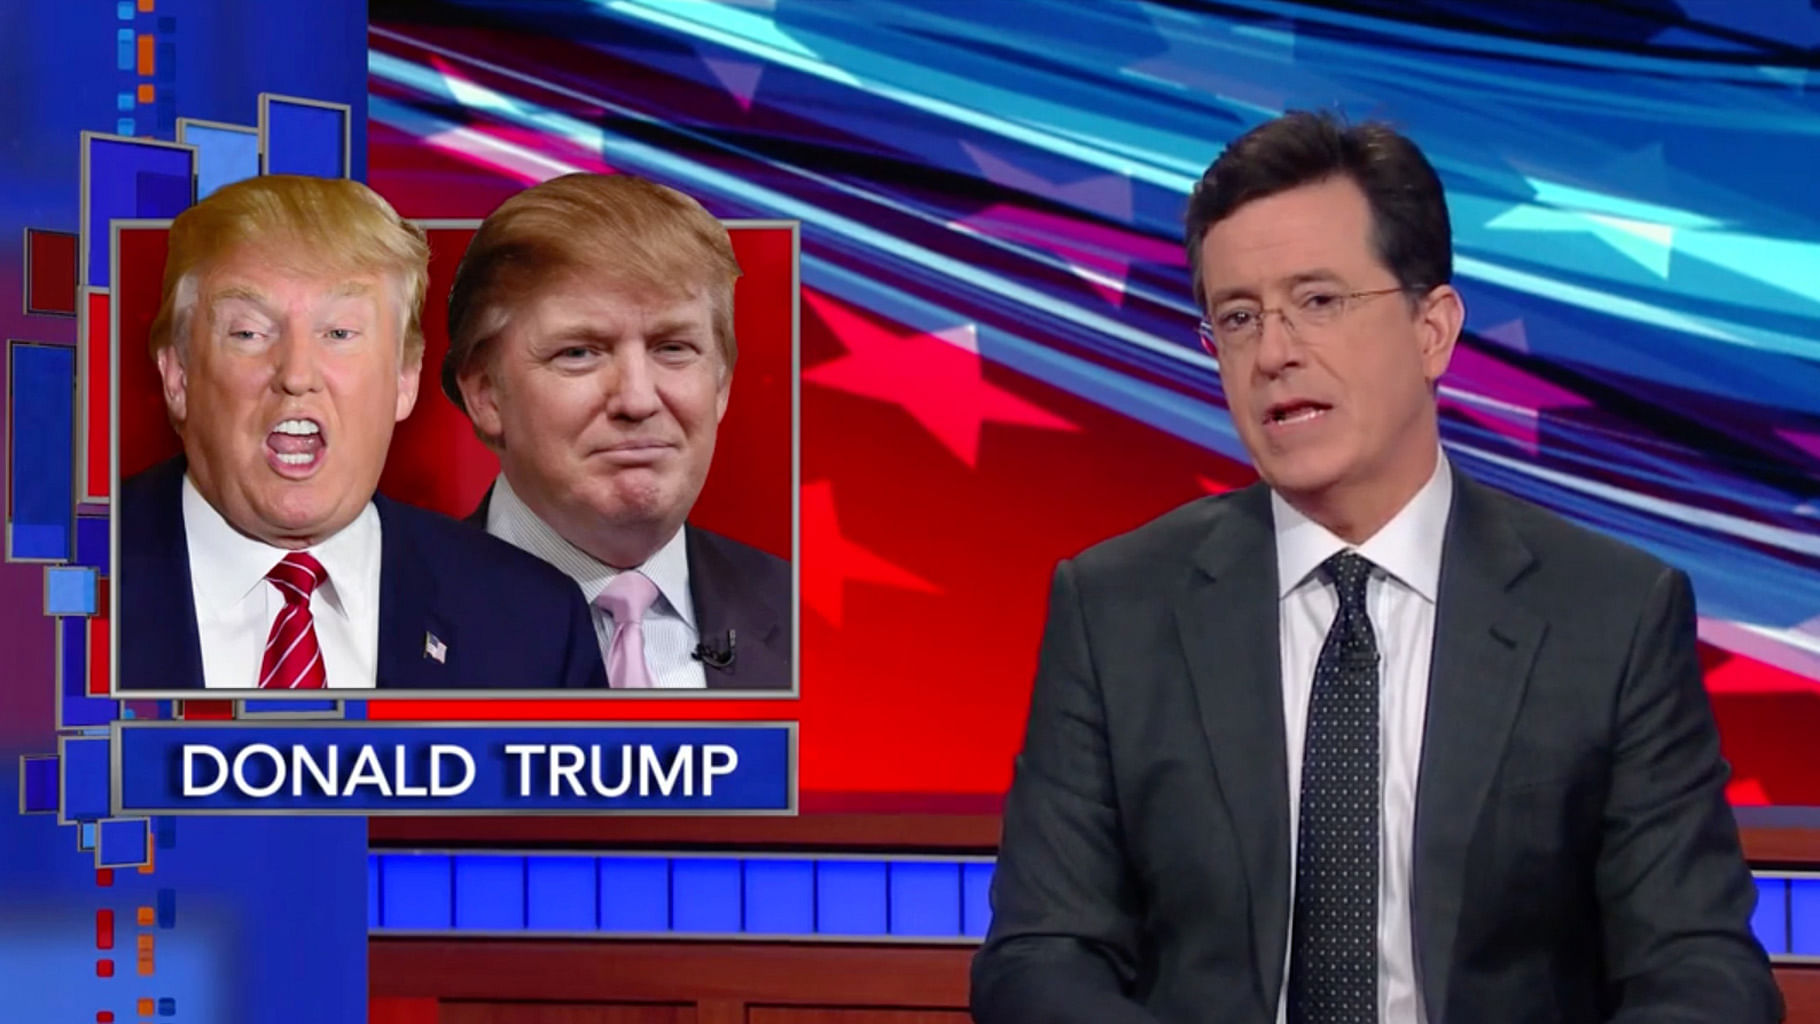 The Late Show with Stephen Colbert<i> </i>went on a tirade against Donald Trump, precipitating a flurry of complaints from viewers. Representational image. (Photo Courtesy: <a href="https://www.youtube.com/watch?v=WpKiP_gmDS8">YouTube</a> screengrab)